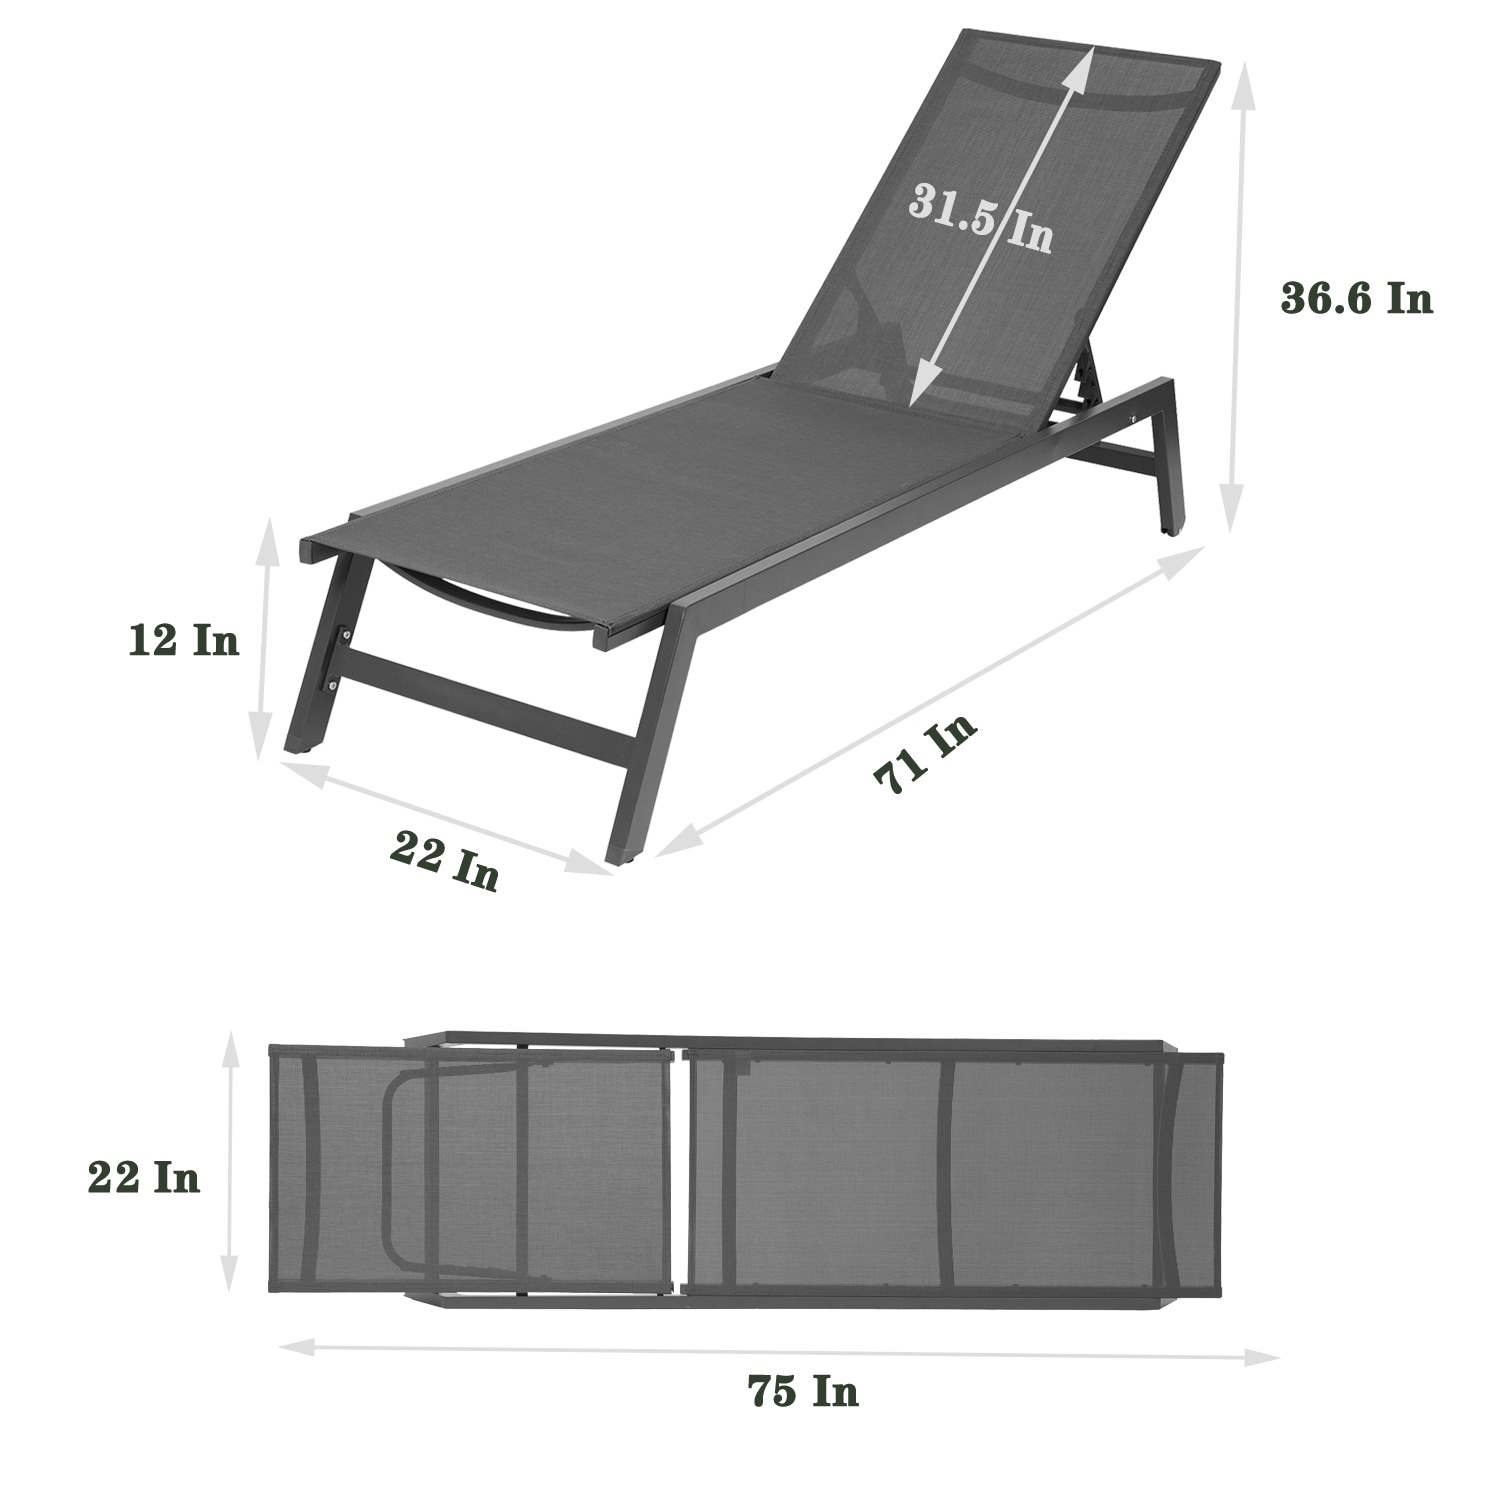 Outdoor Chaise Lounge Chair - N/a